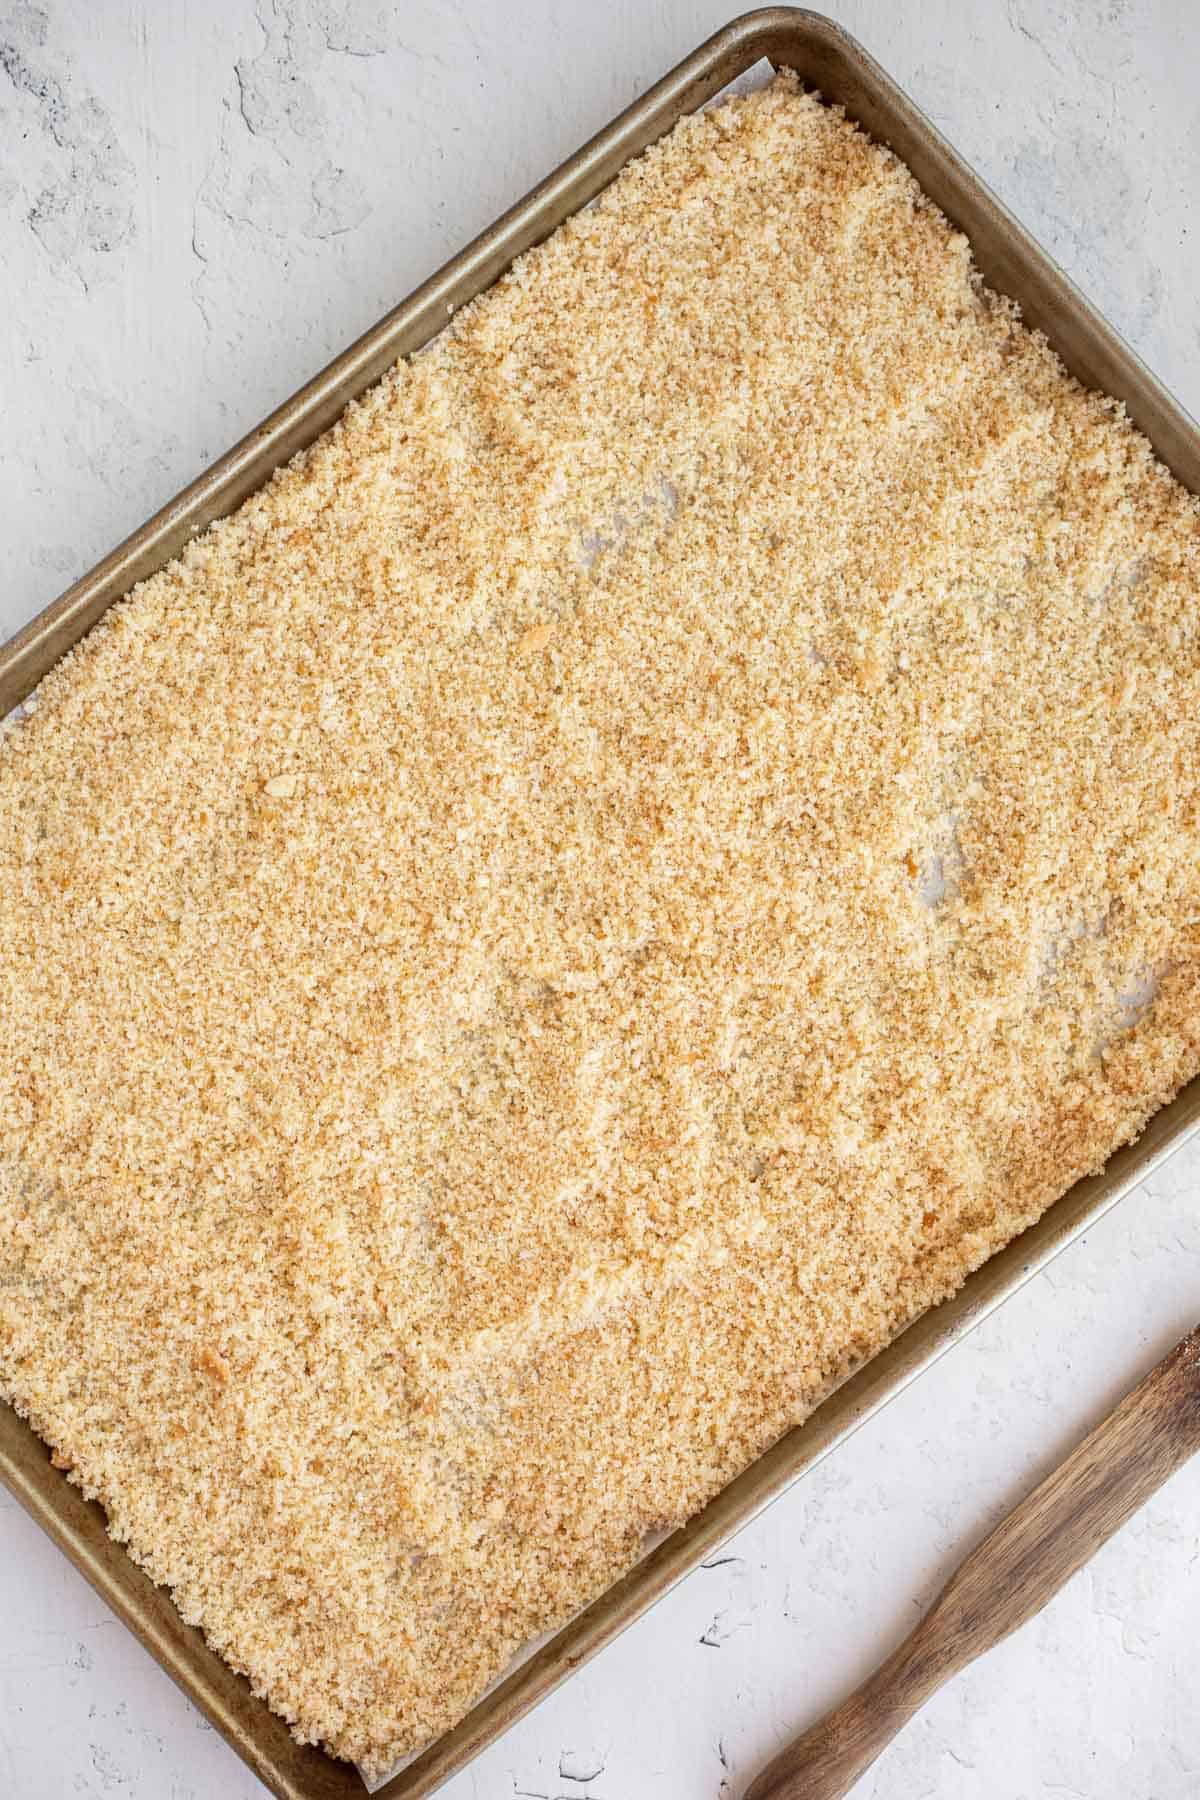 crumbs of bread and oil on a parchment lined baking sheet.